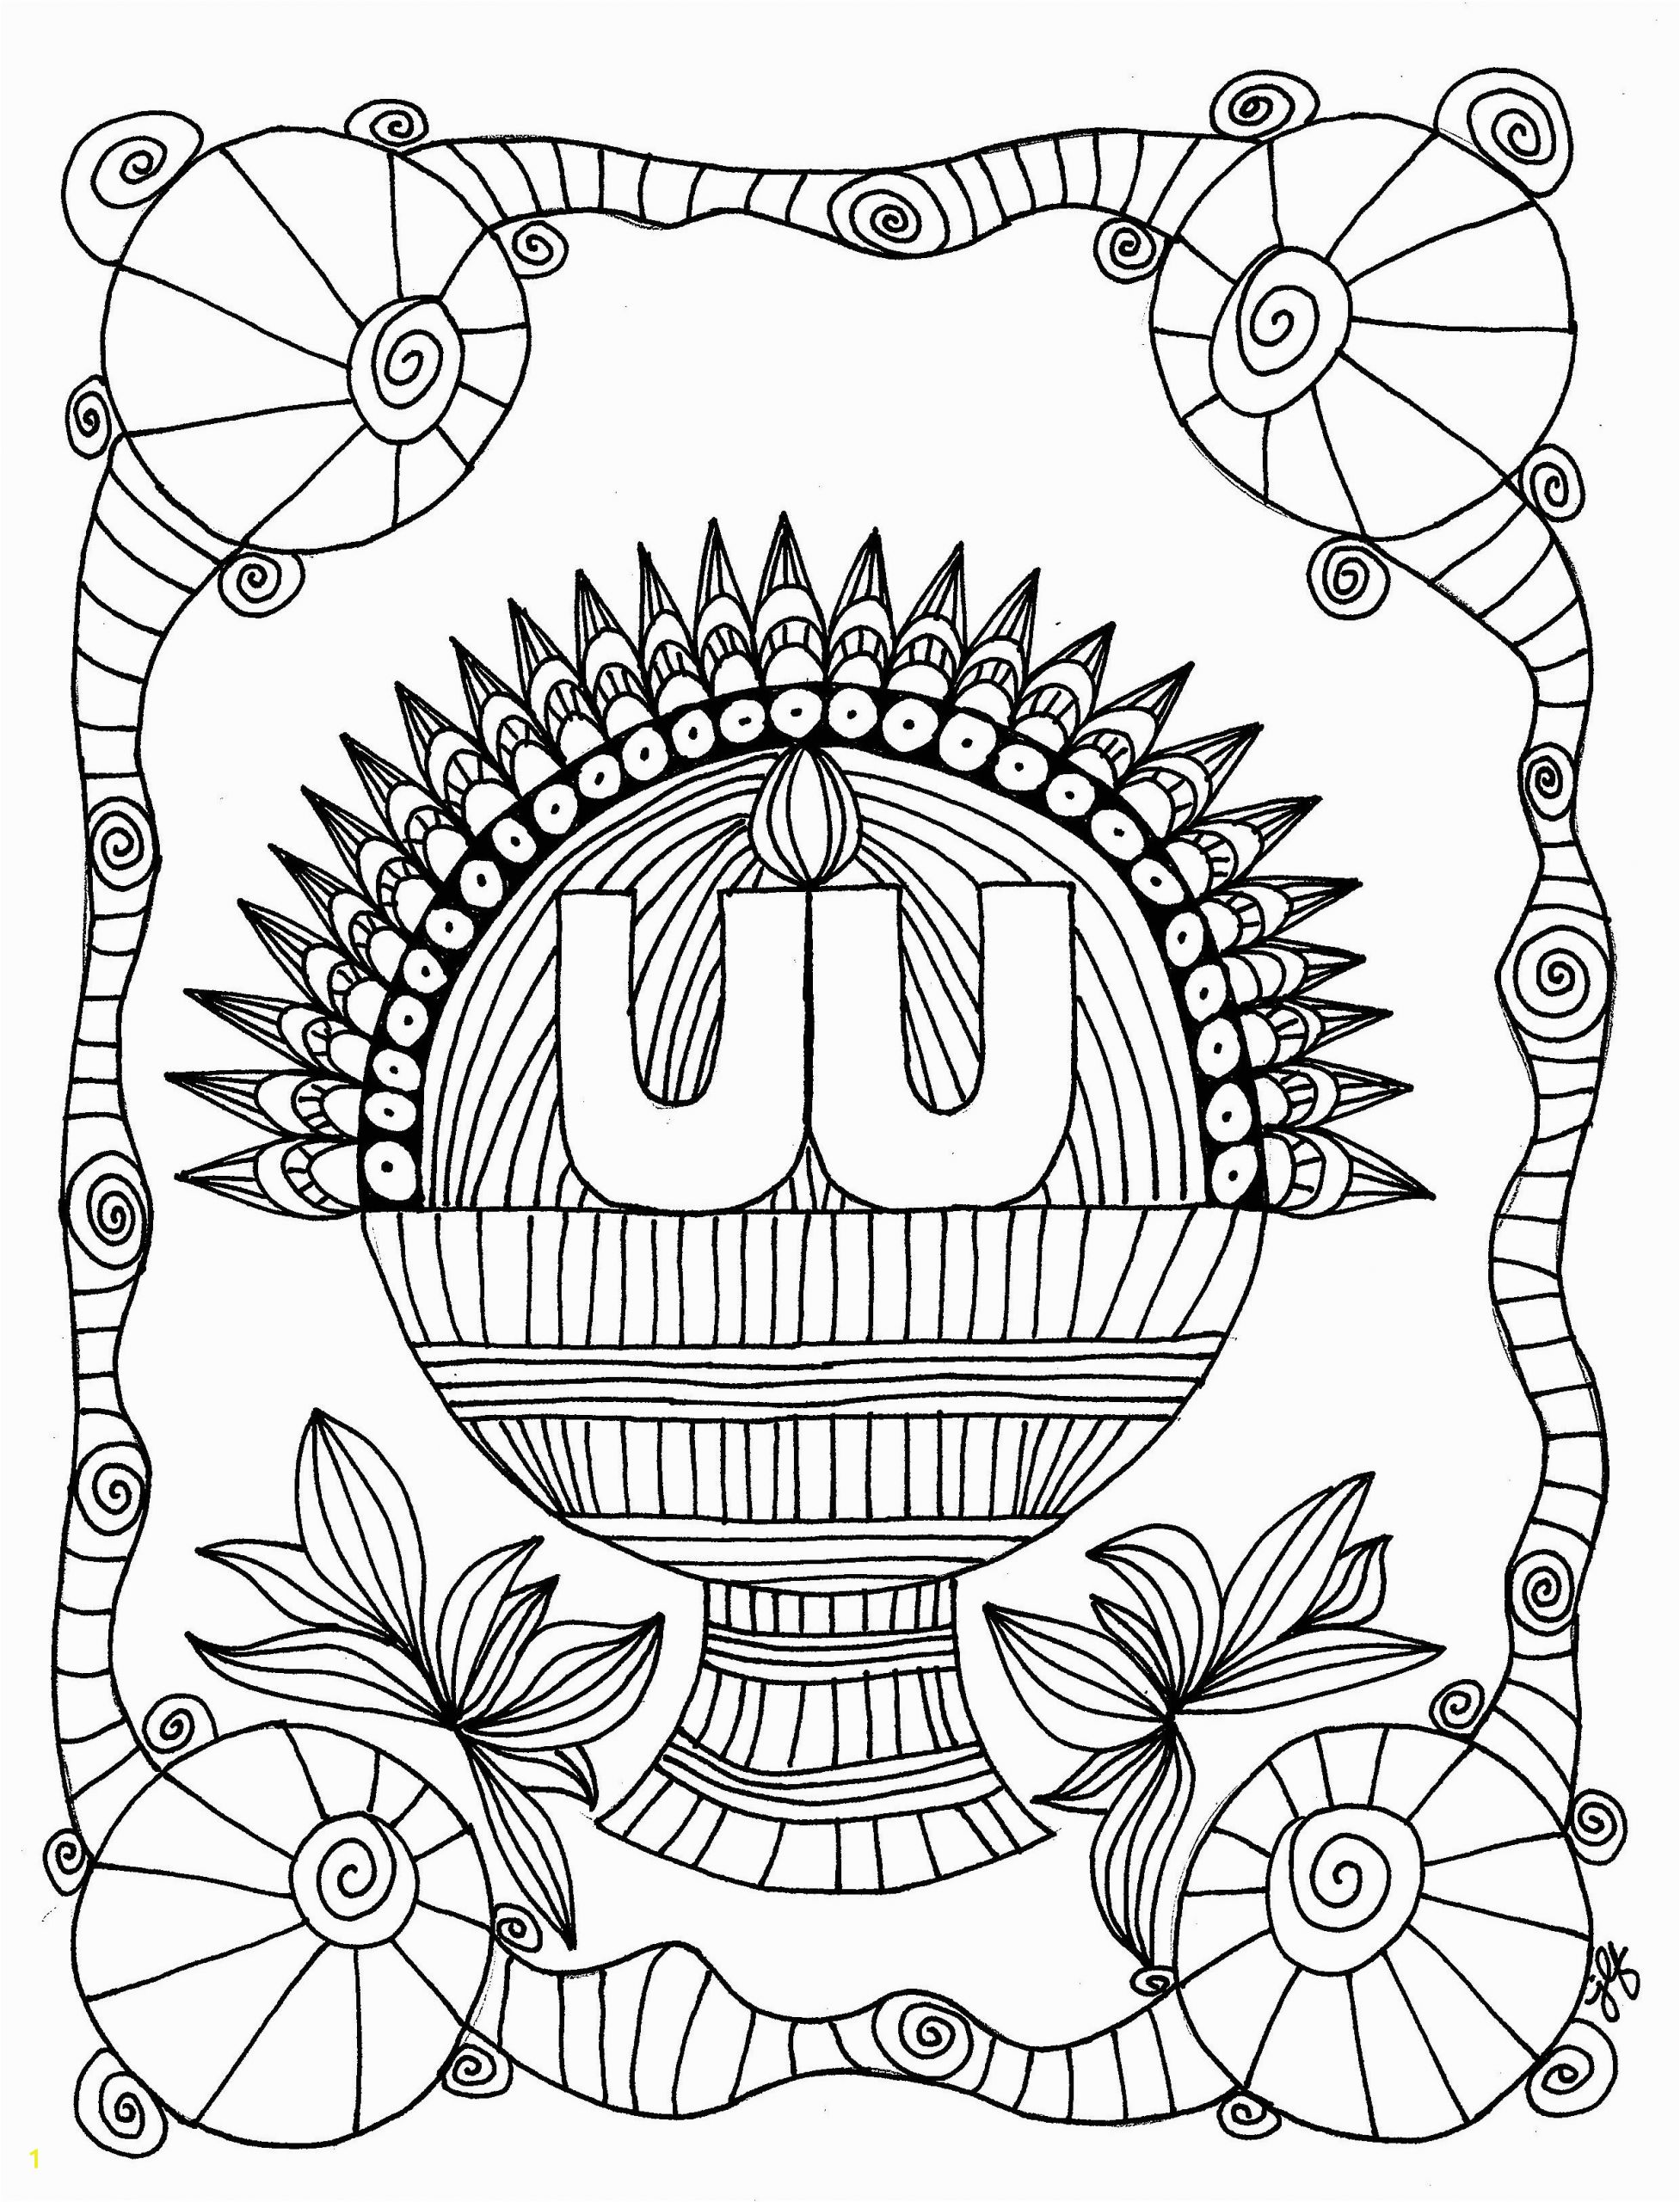 Thanksgiving Basket Coloring Pages Harvest Basket Chalice Coloring Page